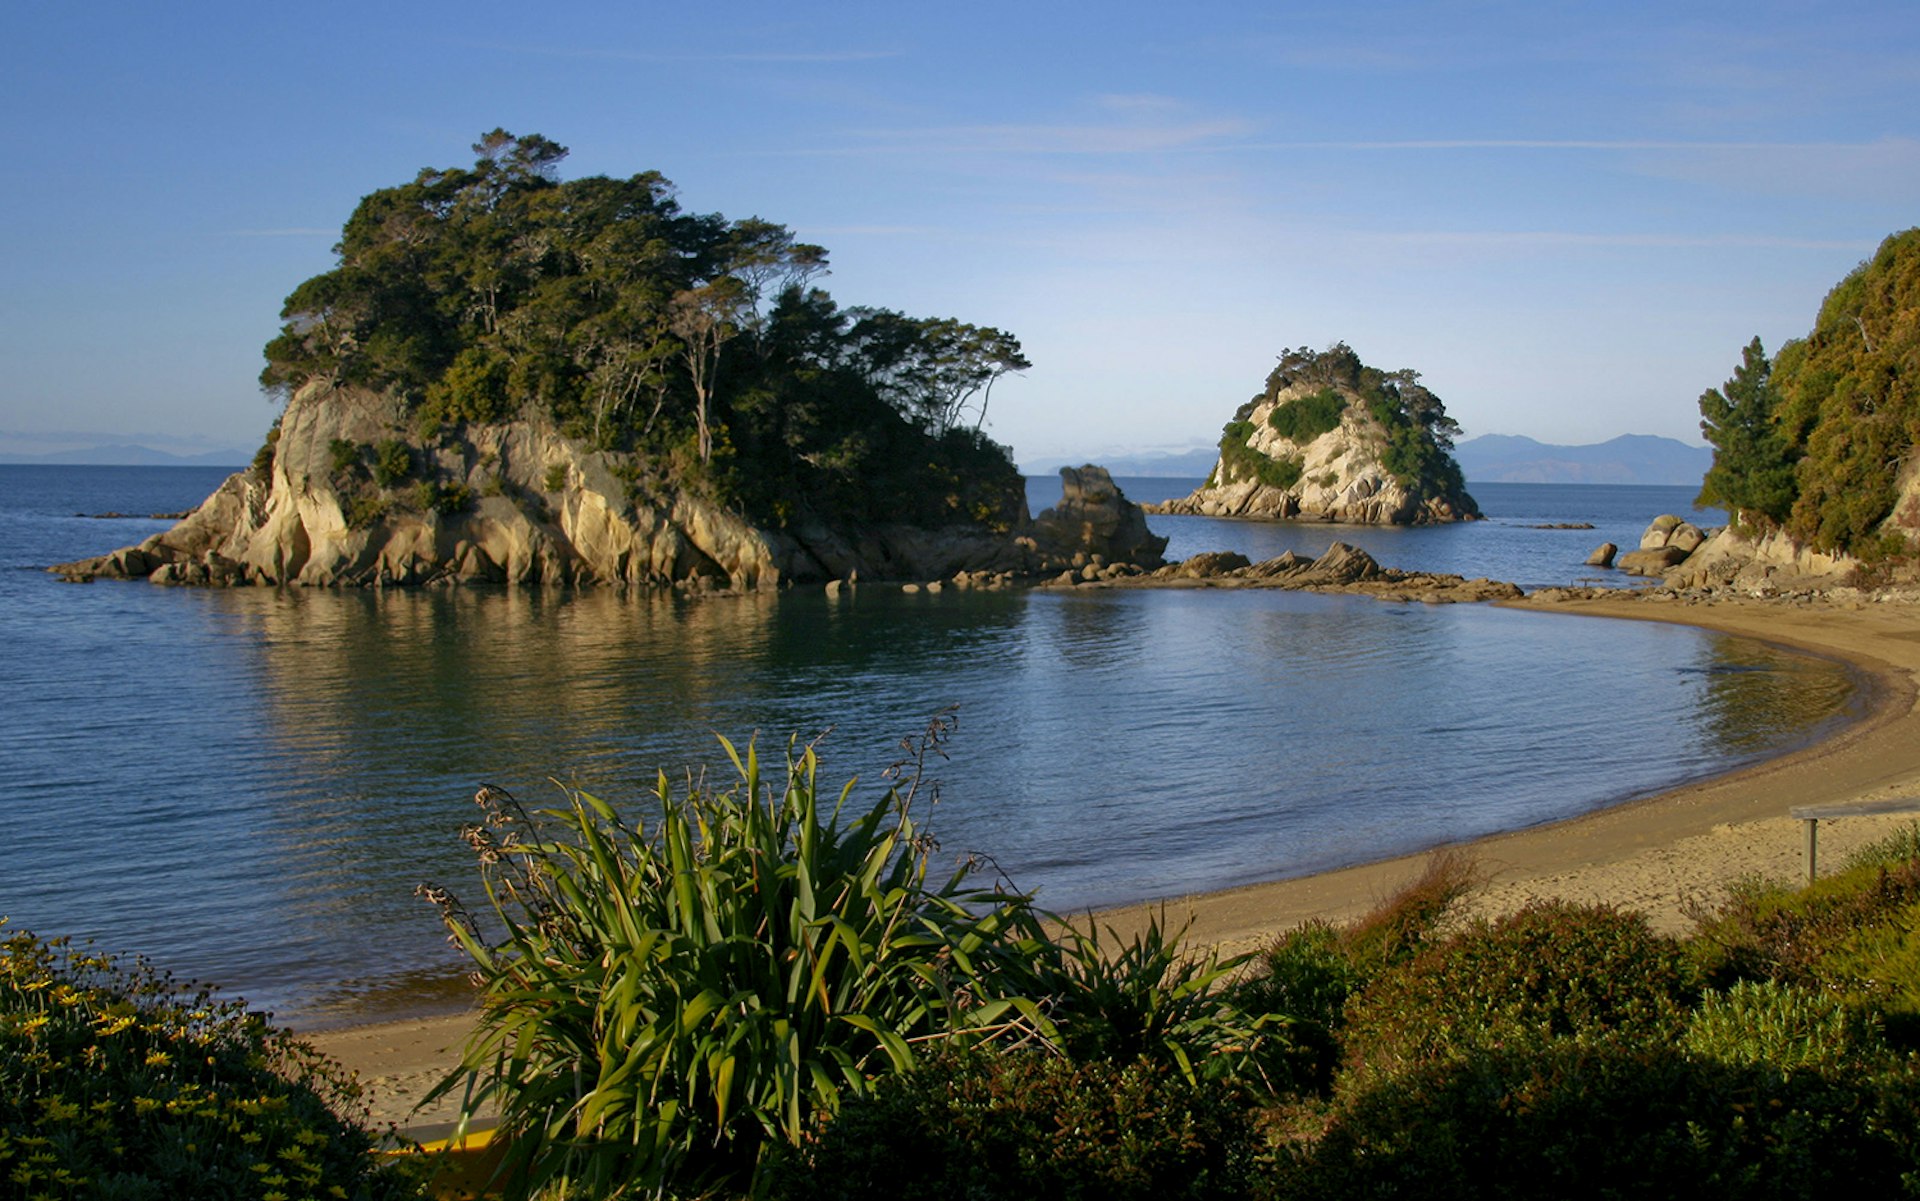 Kaiteriteri's beaches are a welcome rest after powering your calves along New Zealand's Great Taste Trail. Image by Jonathan Reid / CC BY 2.0